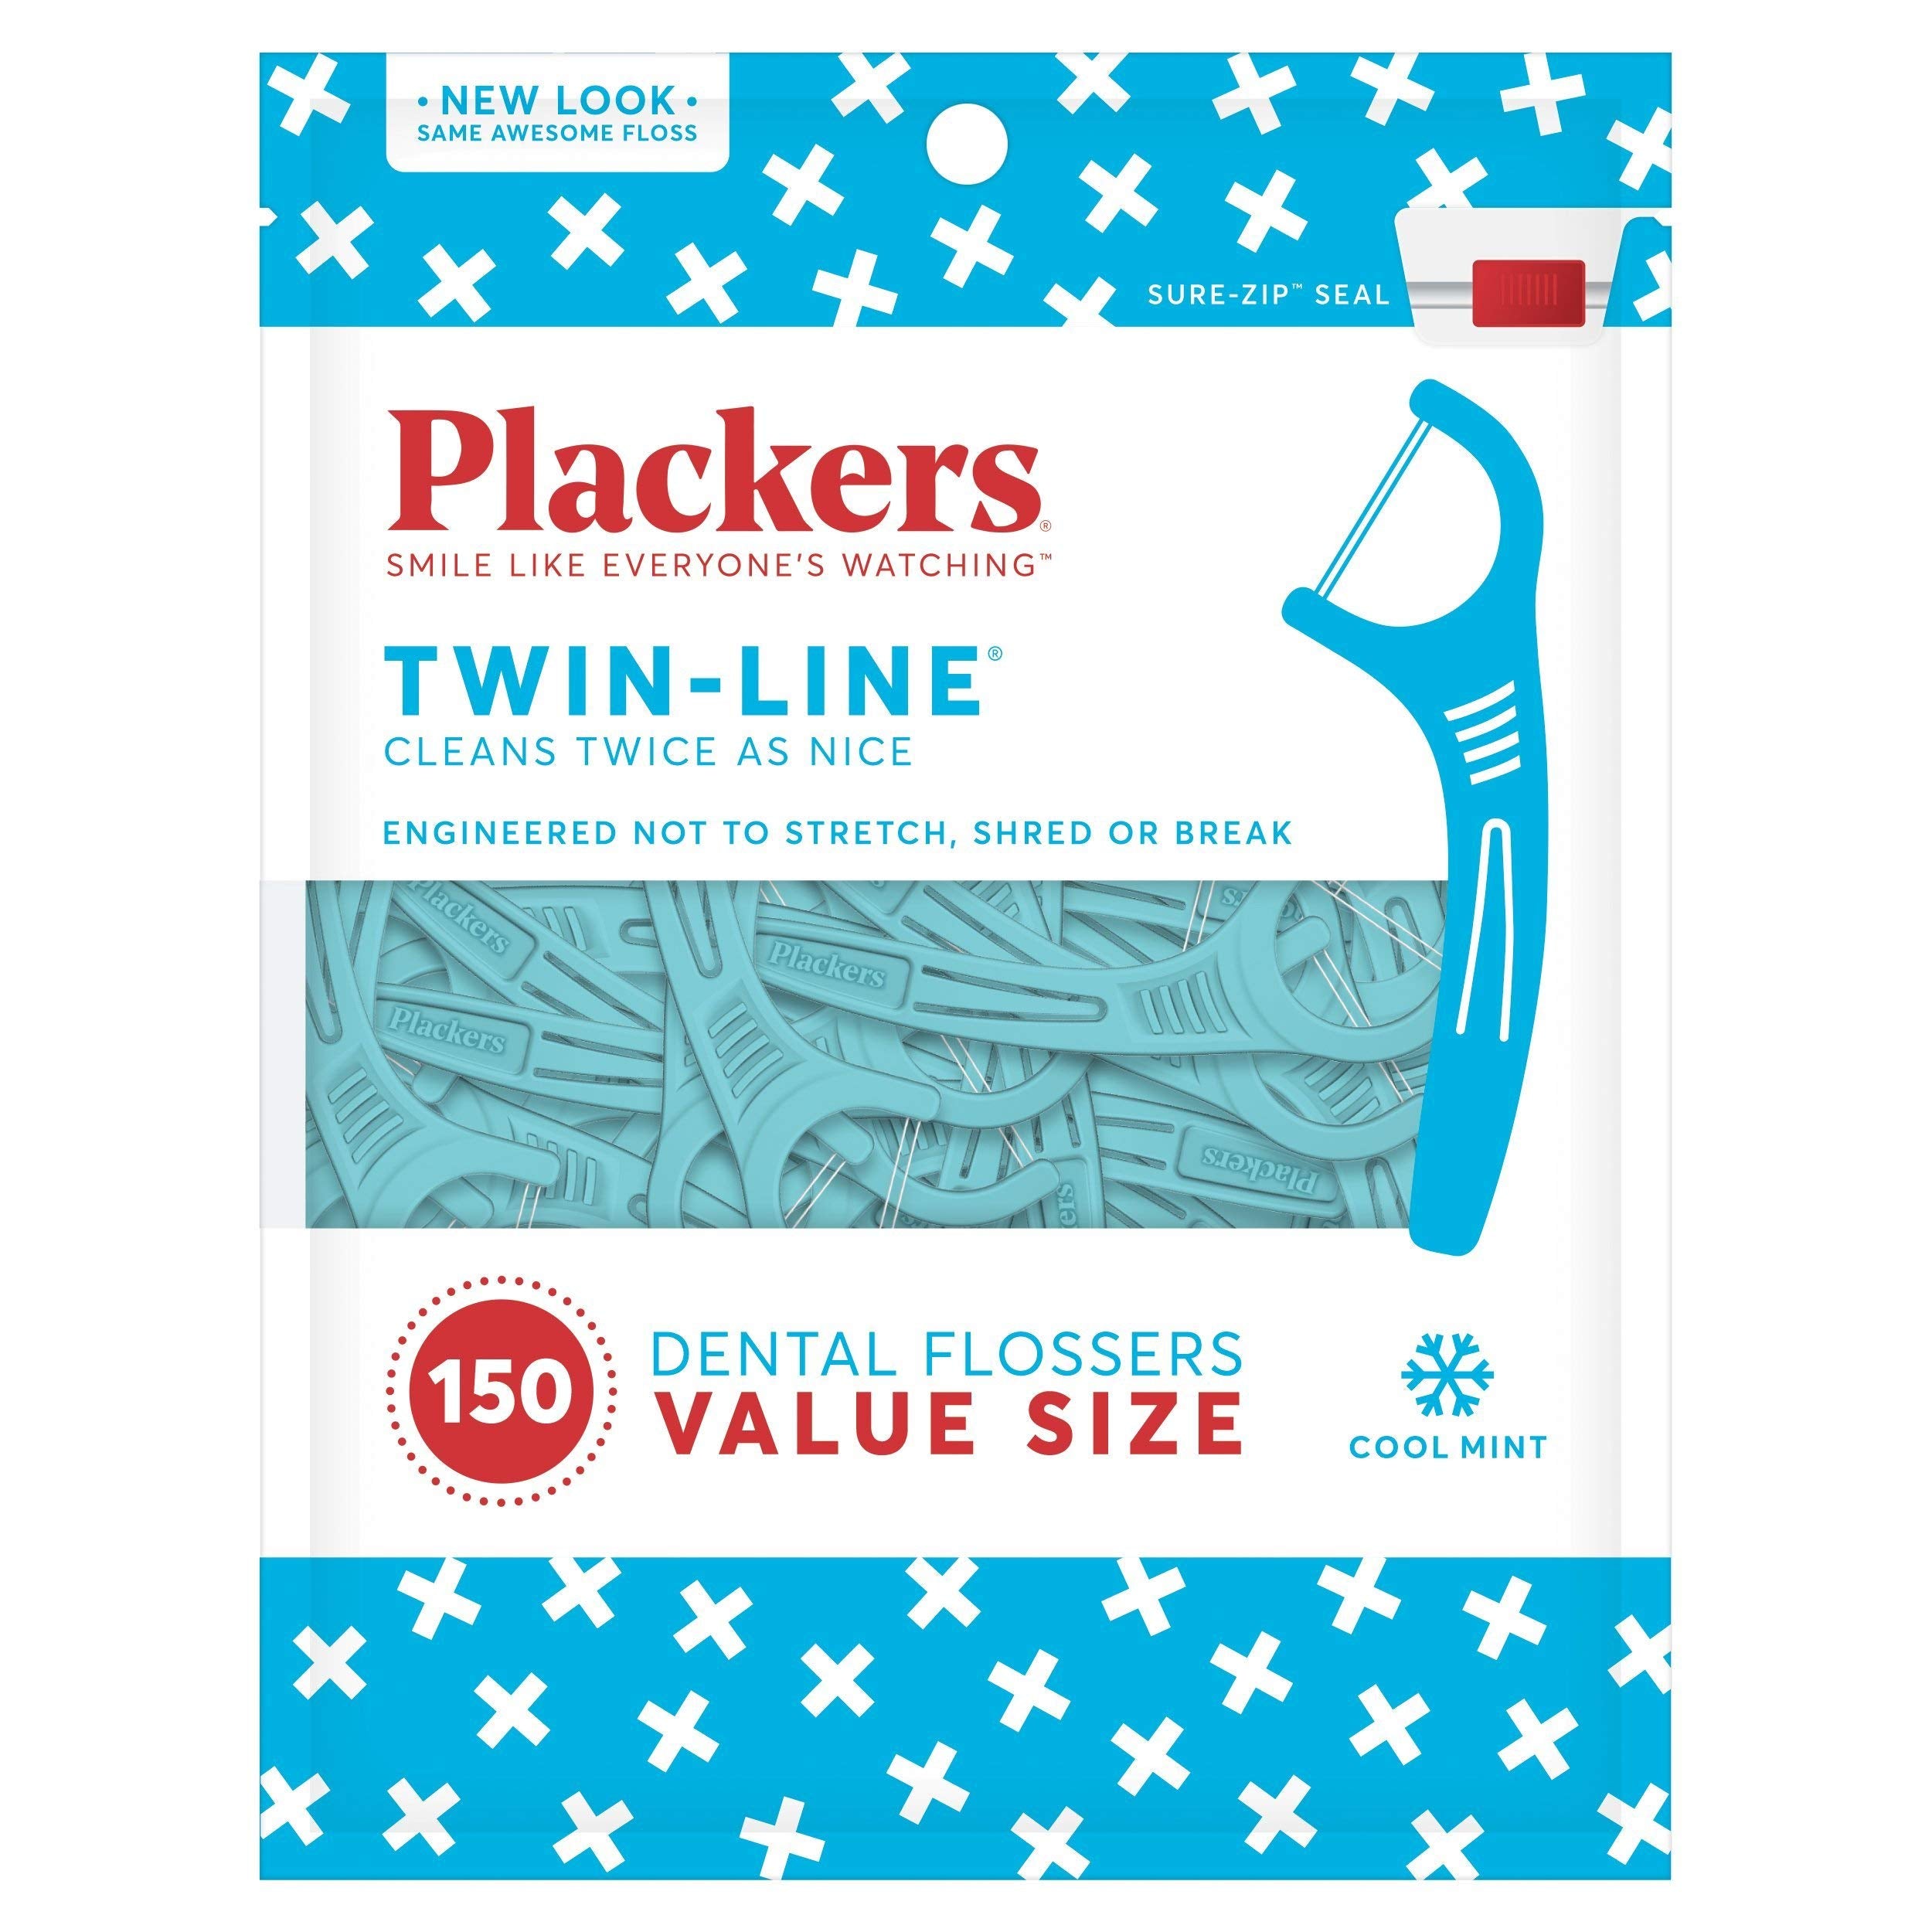 Plackers, Twin-Line, Dental Flossers, Value Size, Cool Mint, 1 x 150 Count